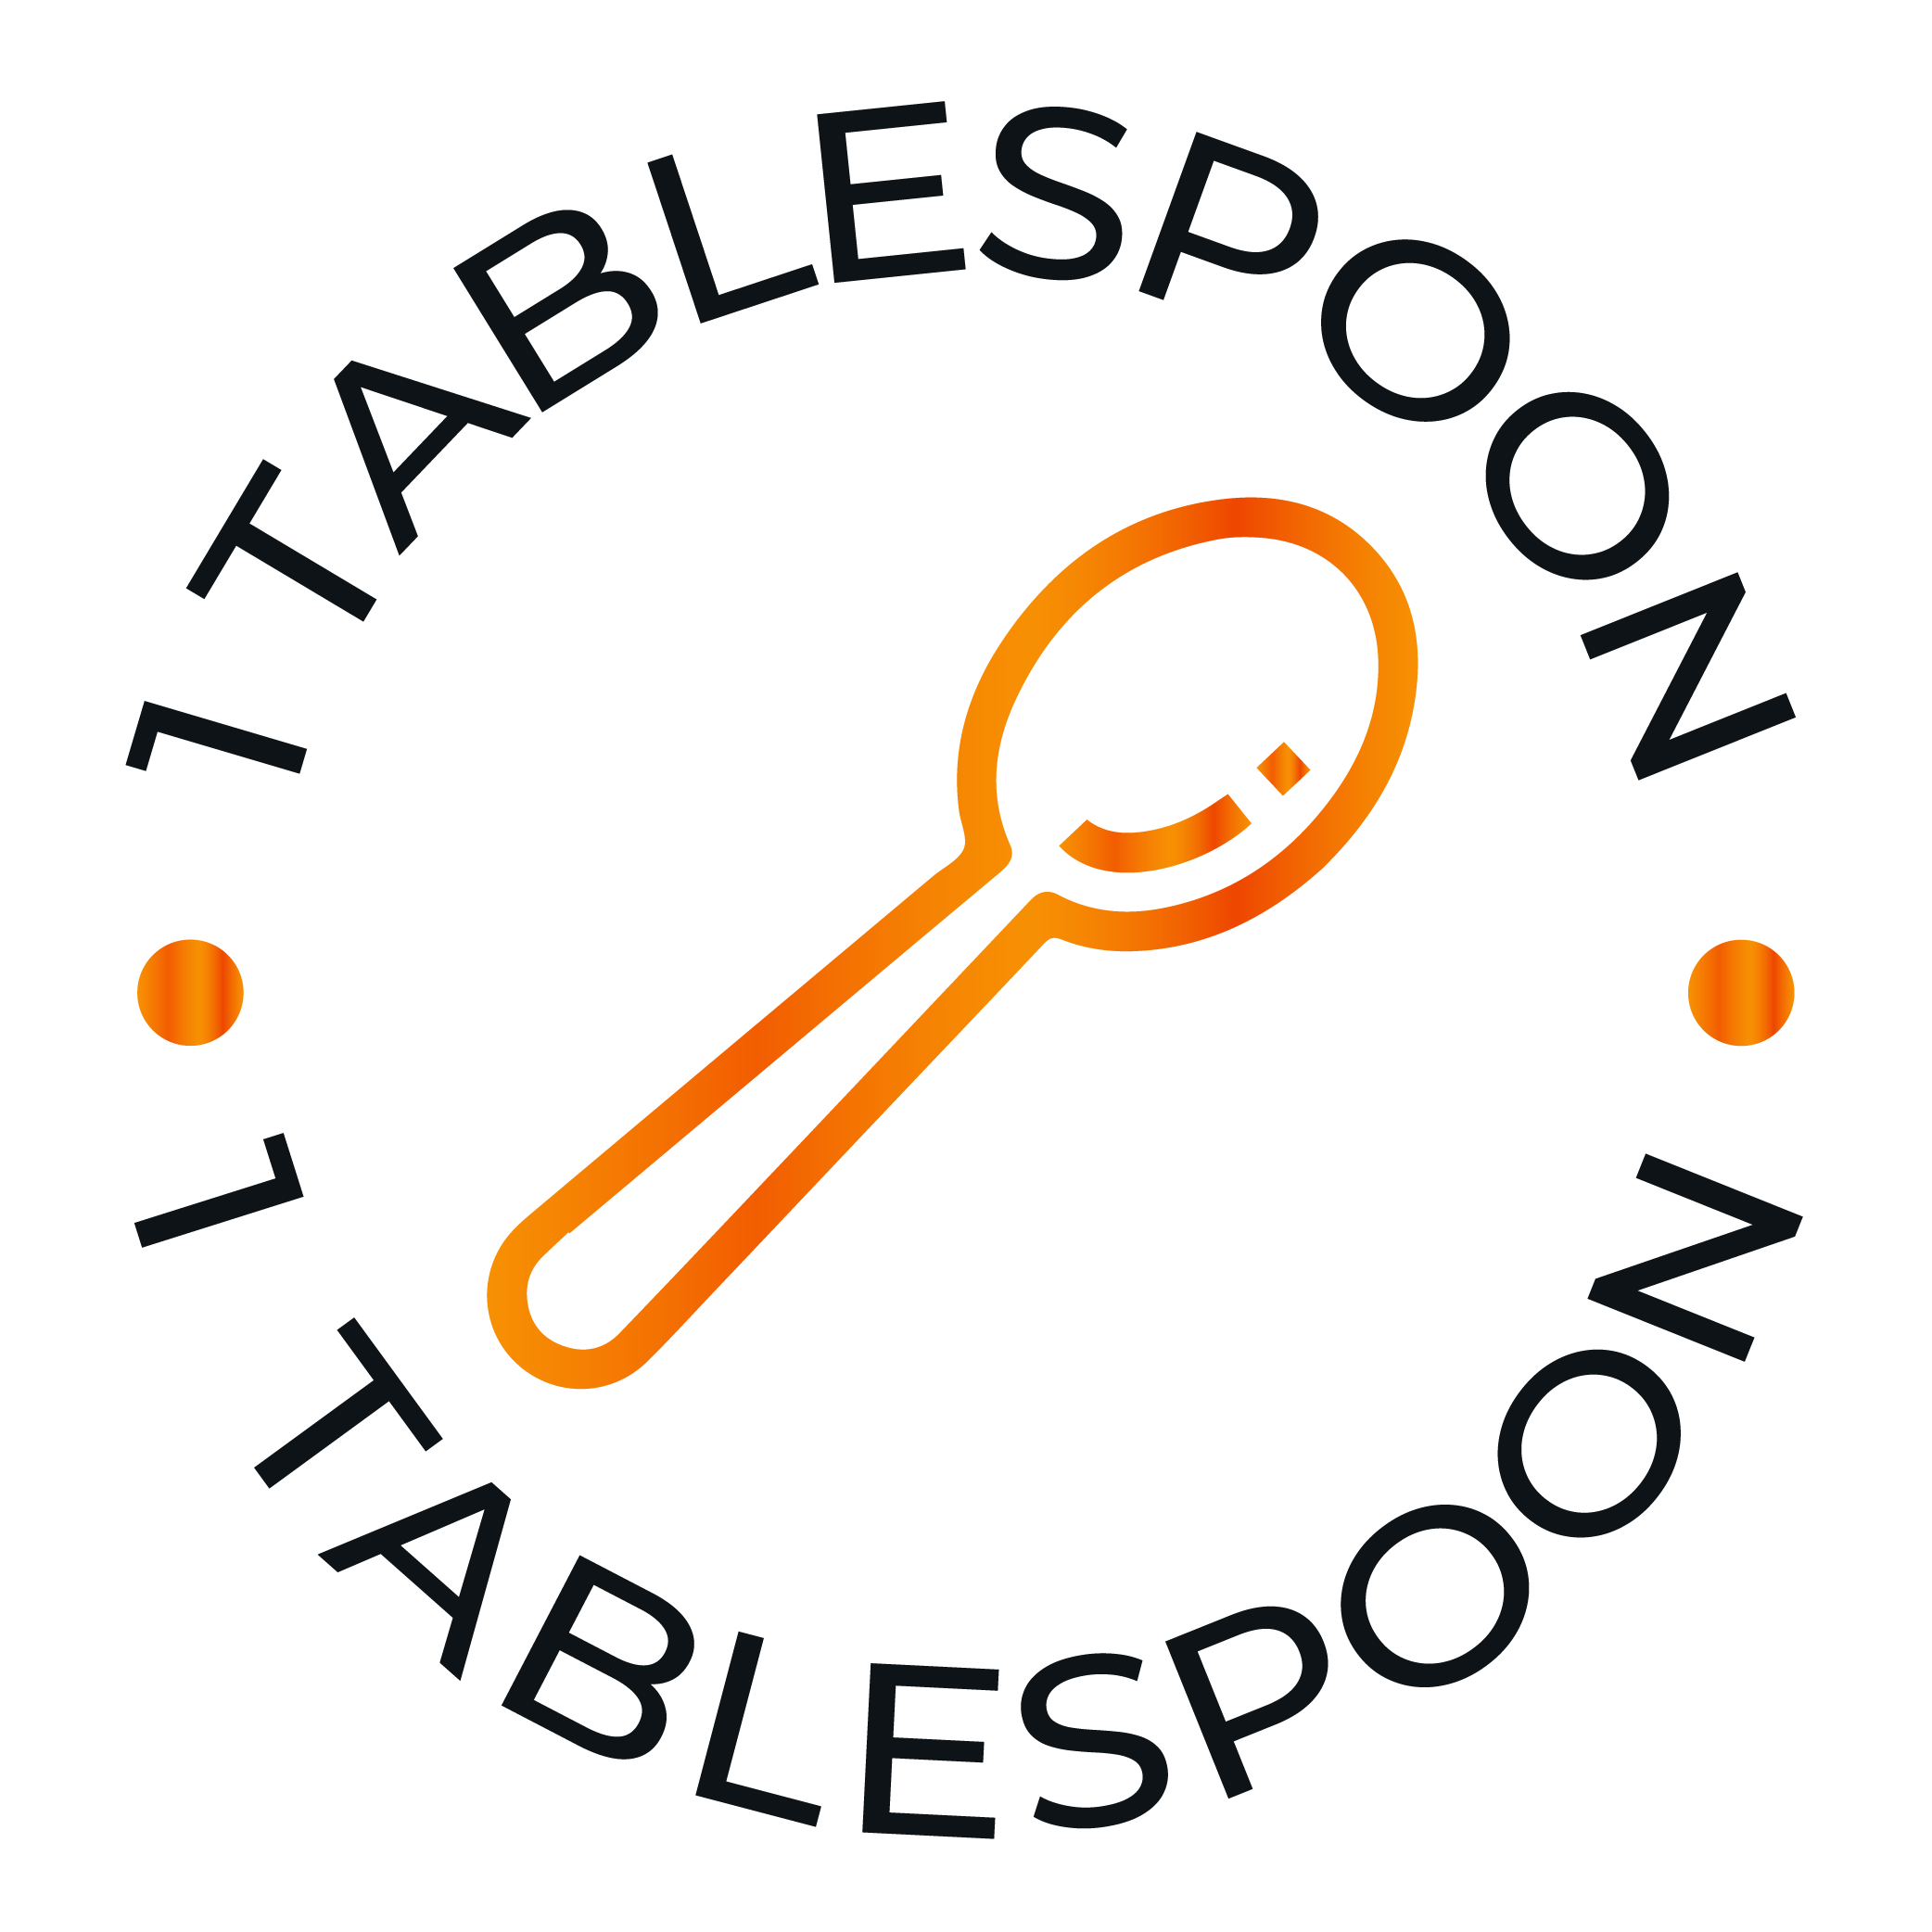 tablespoon image